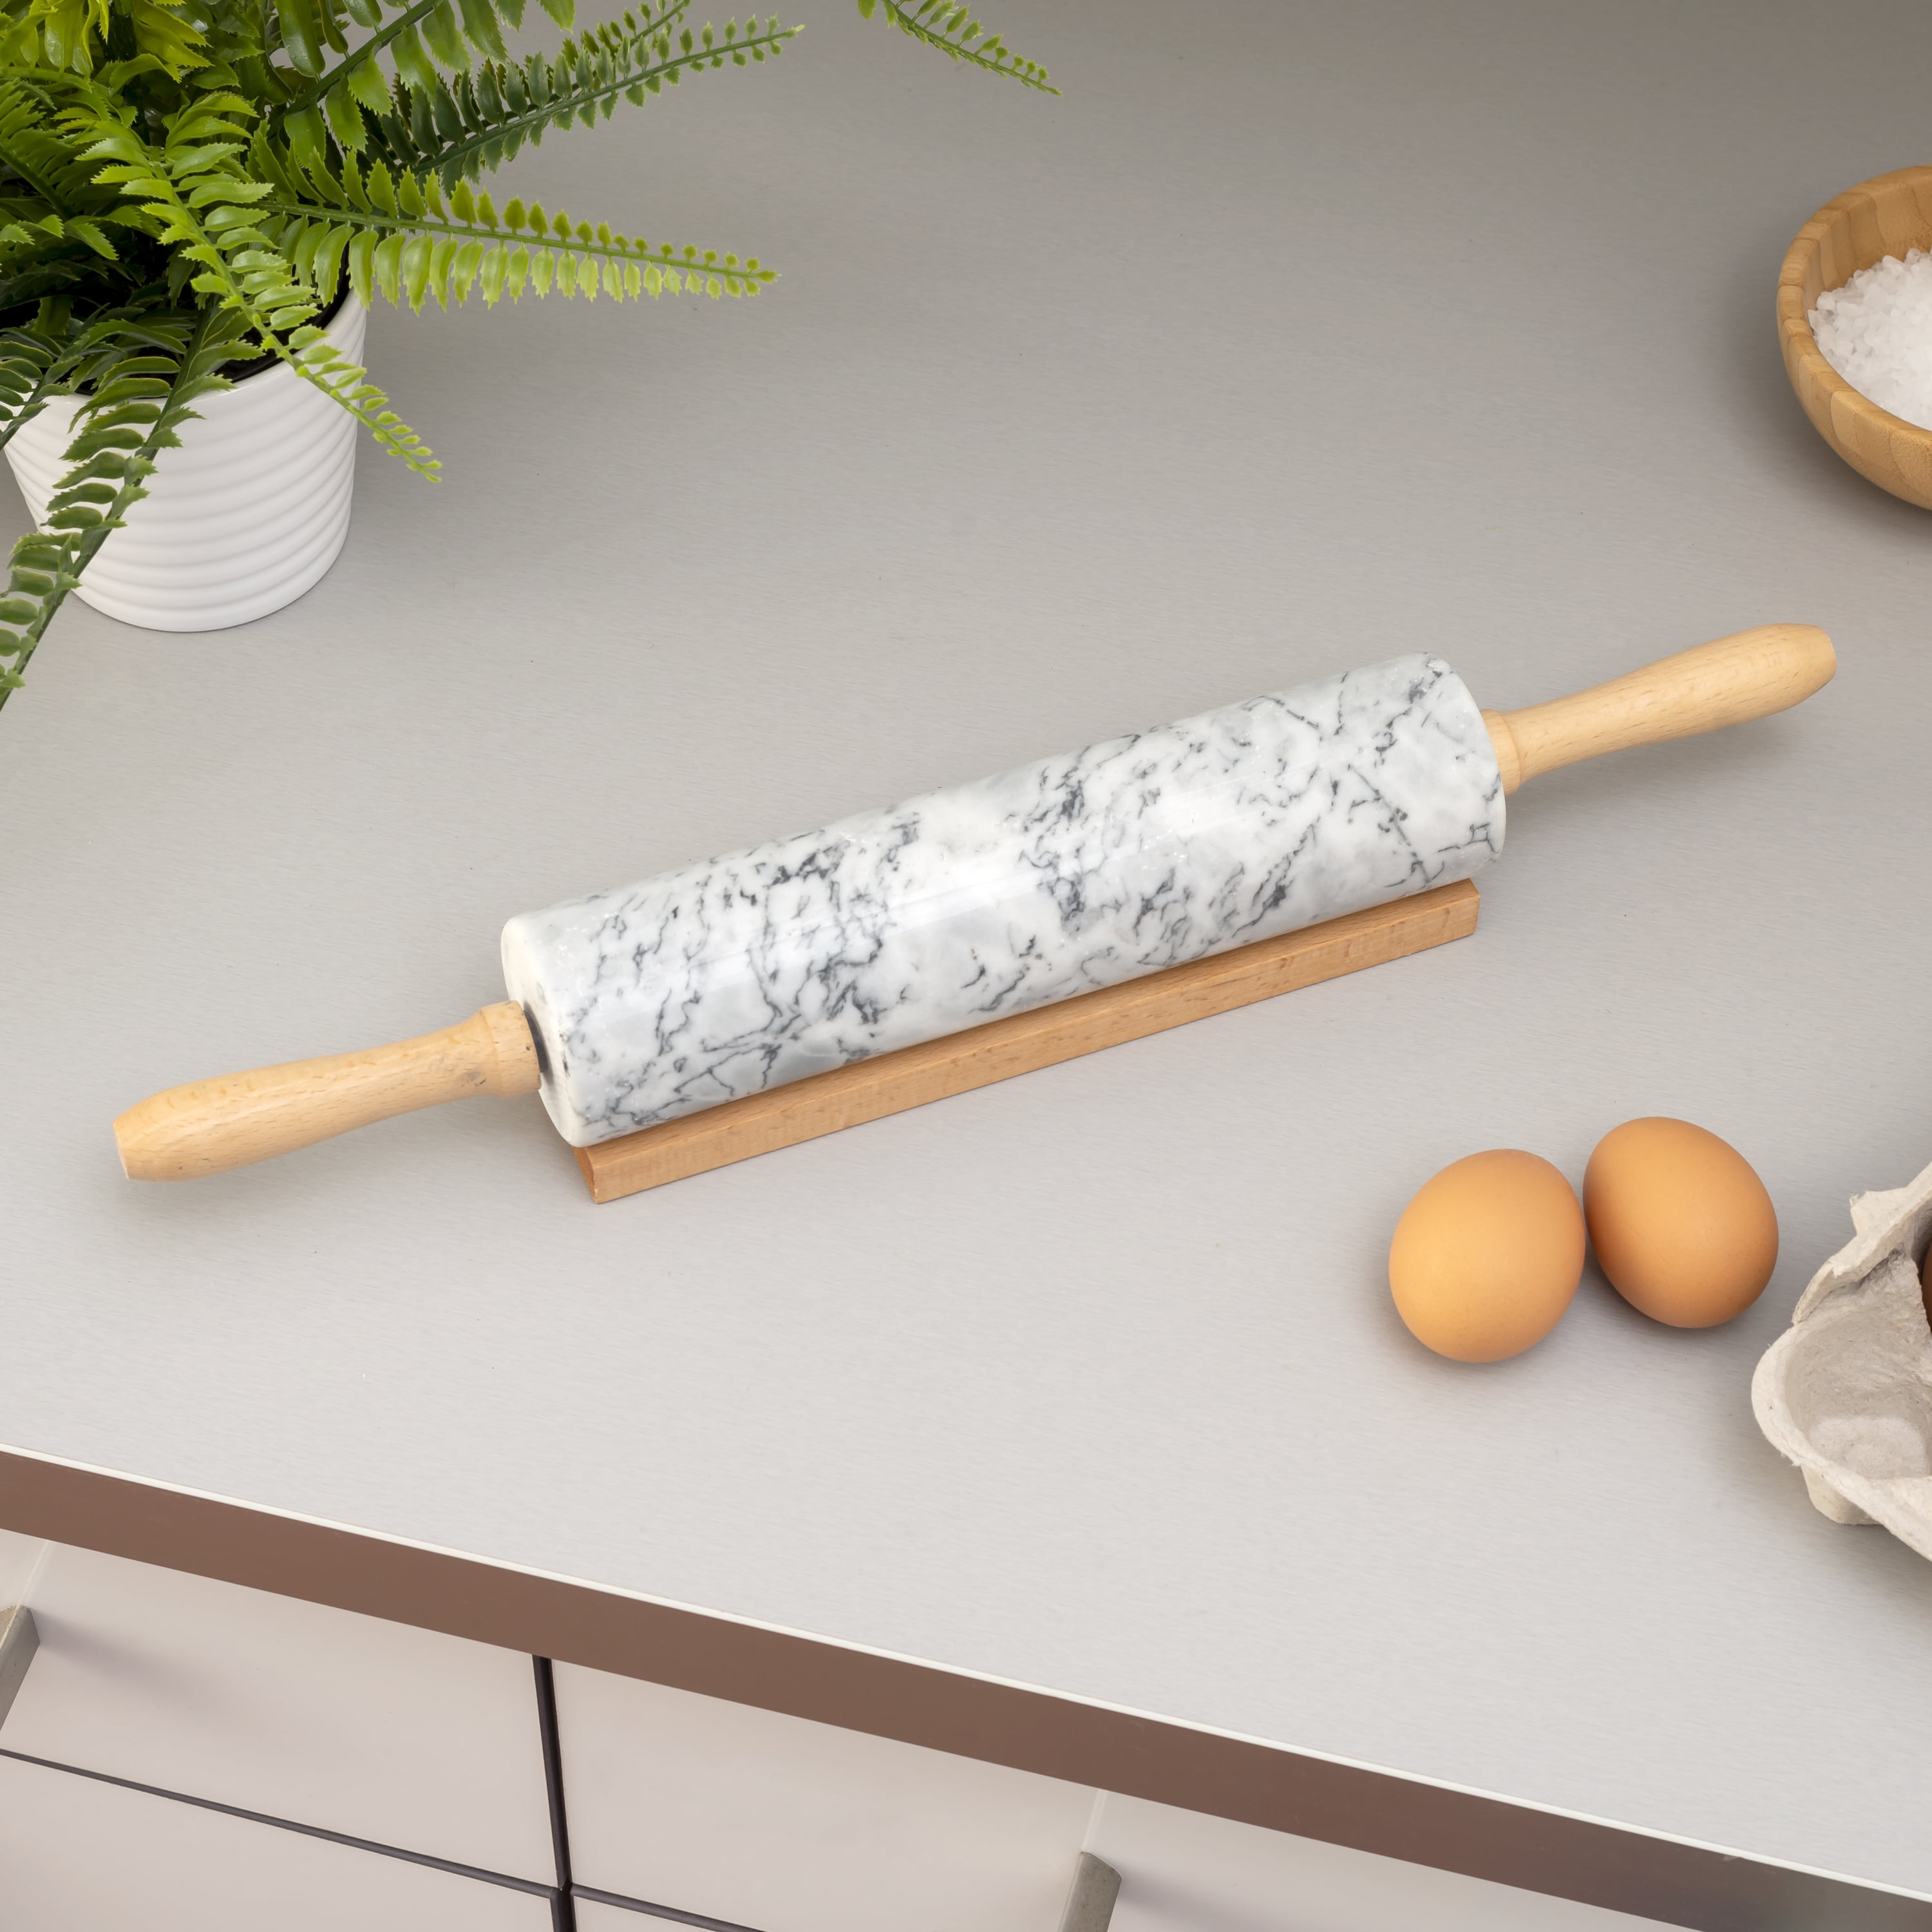 Hobart extremely ebb tide HBMarble Rolling Pin with Easy Grip Handles and Display Stand, White -  Walmart.com